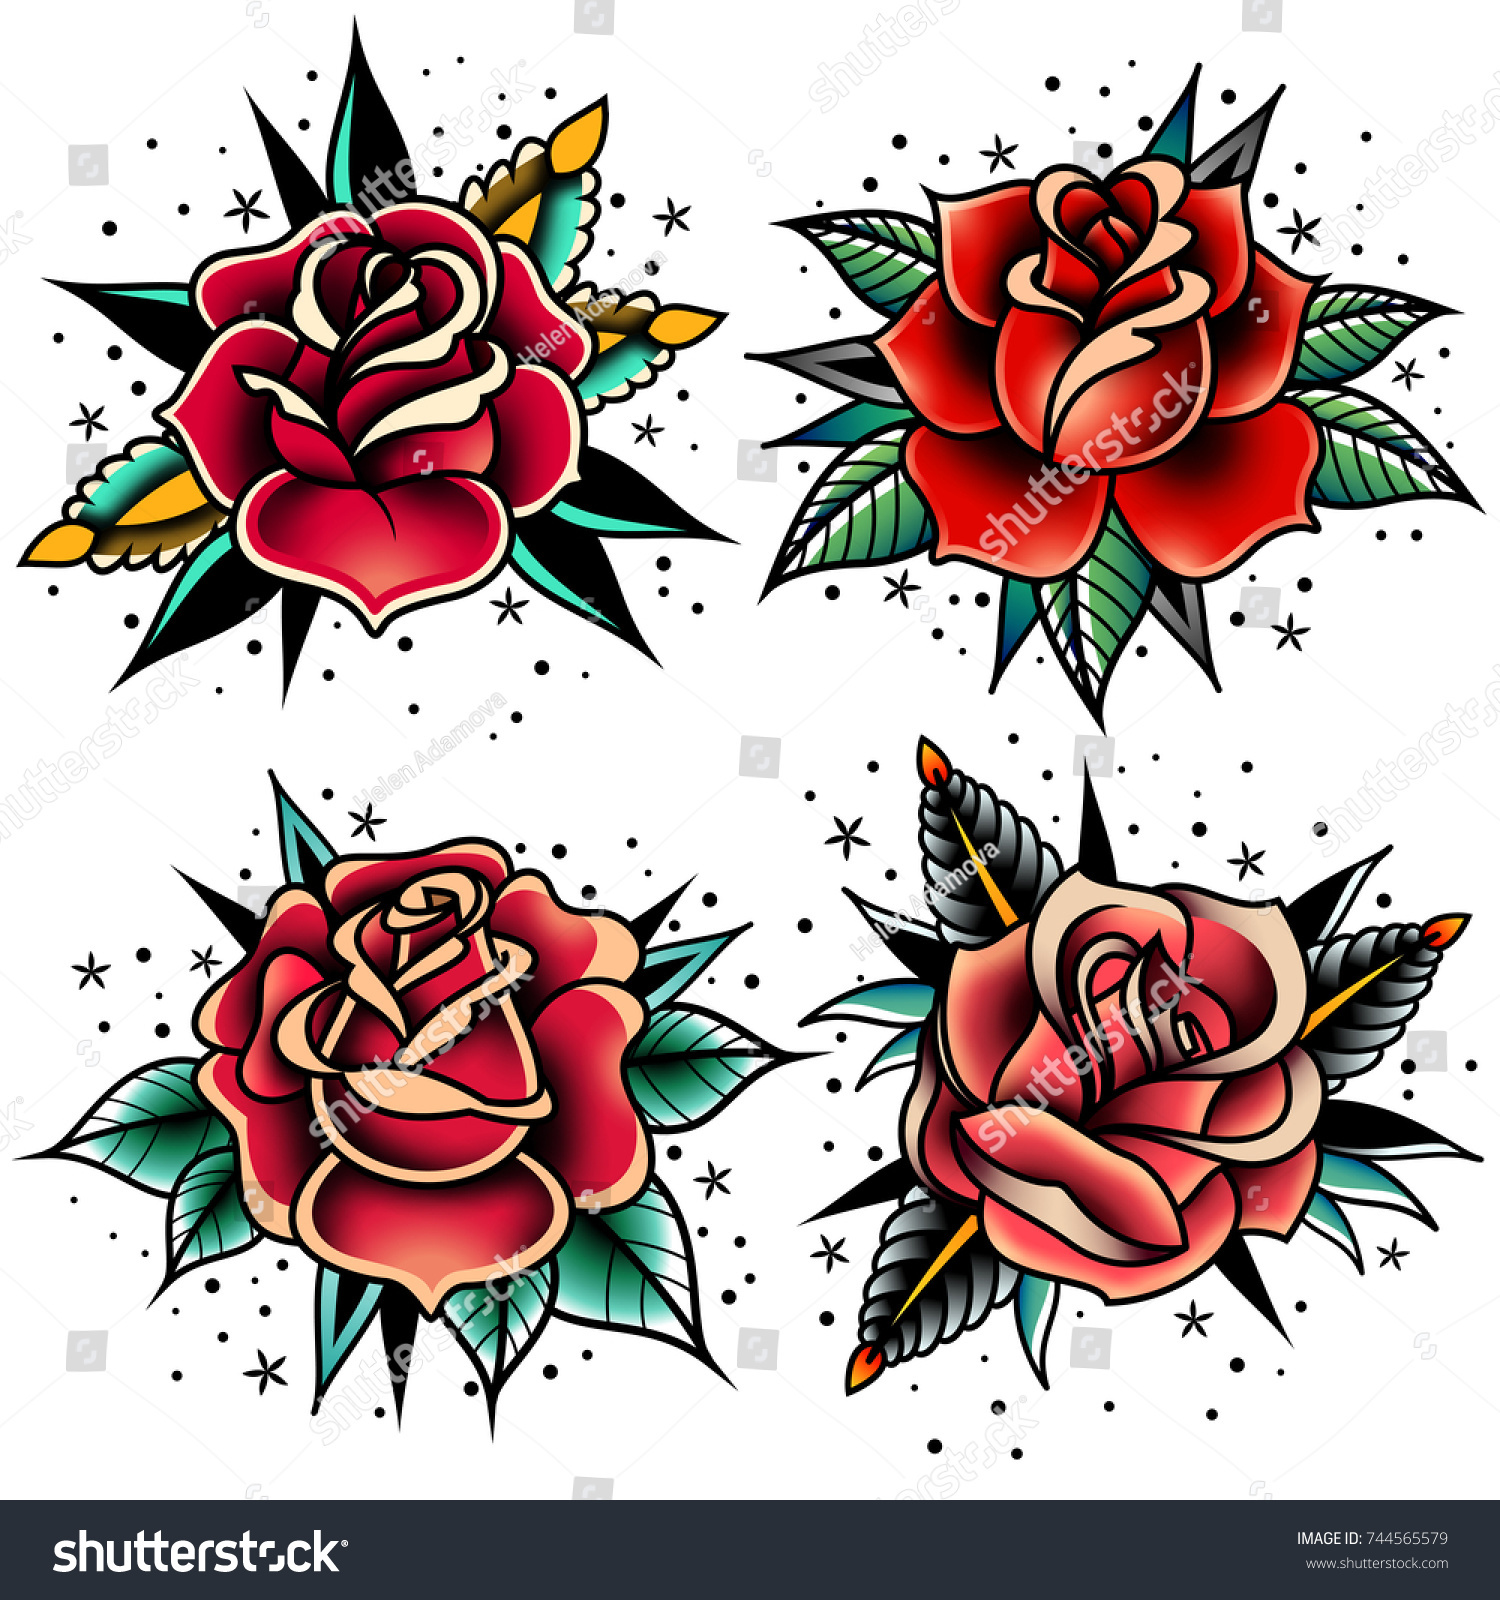 Old tattooing school colored icons set with roses symbols isolated vector illustration #744565579